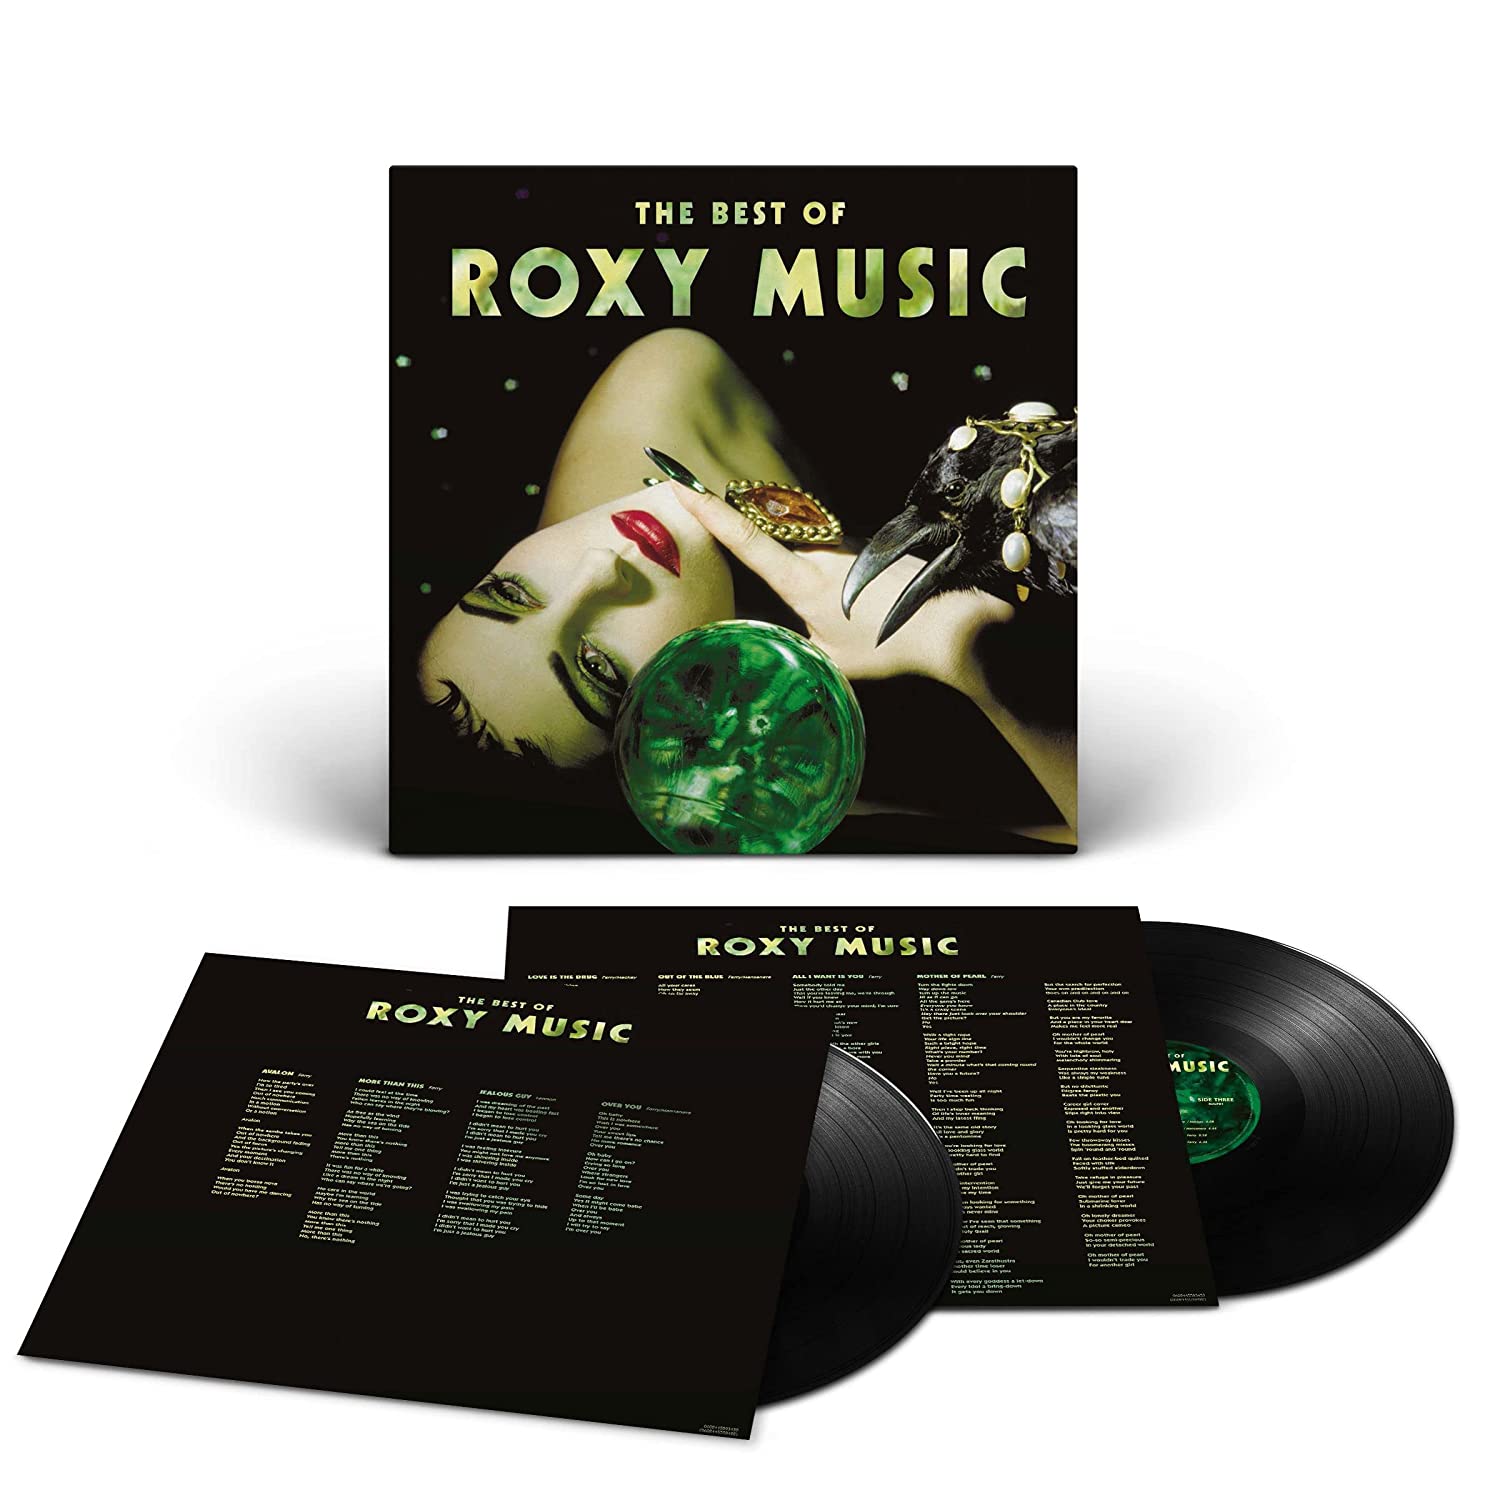 ROXY MUSIC - THE BEST OF